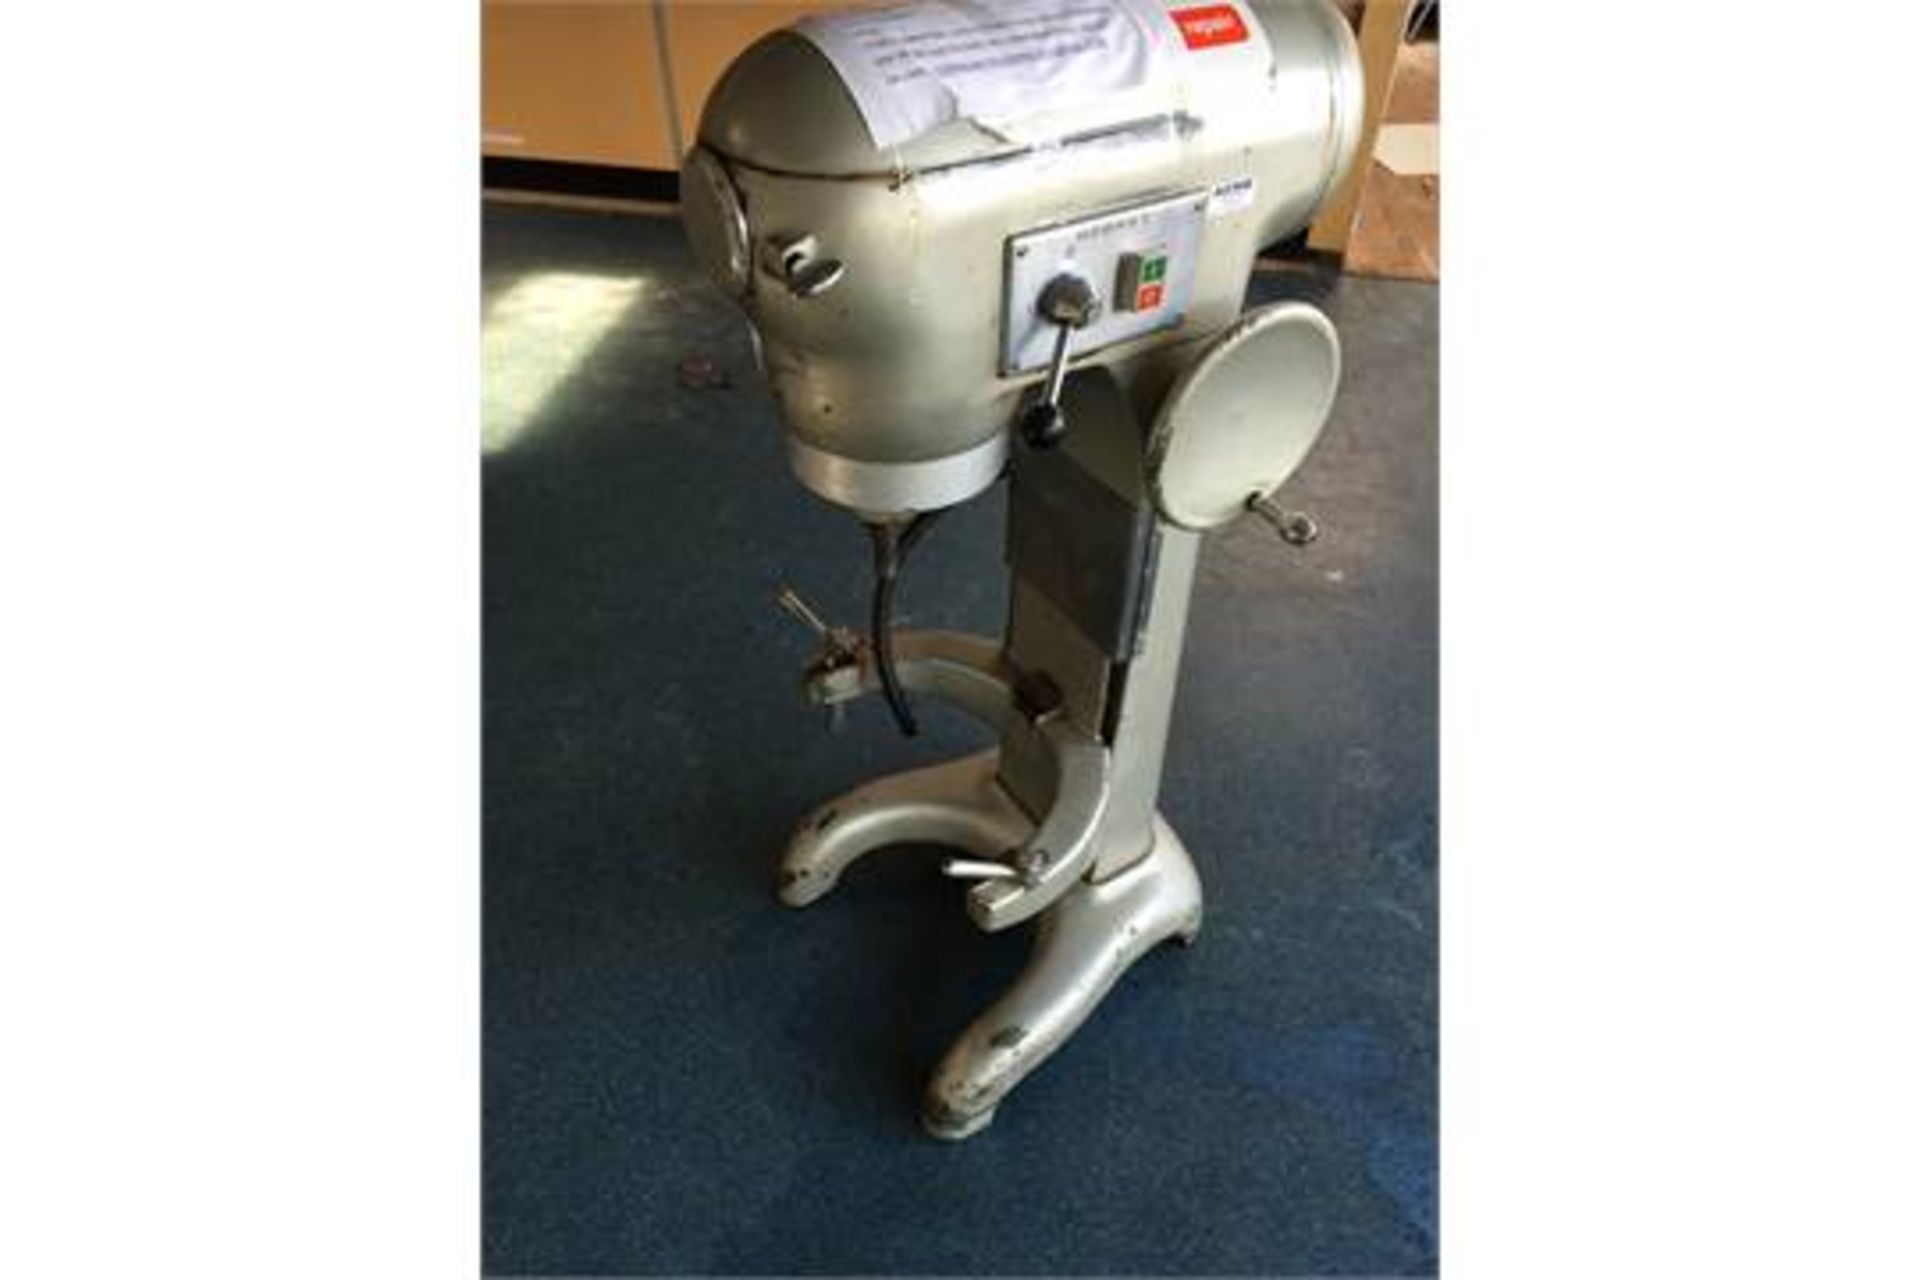 Bakery / Pizza / Industrial Food Mixer Hobart Se-320 240V Single Phase Mixer (Cost Just Over £14K) - Image 2 of 4